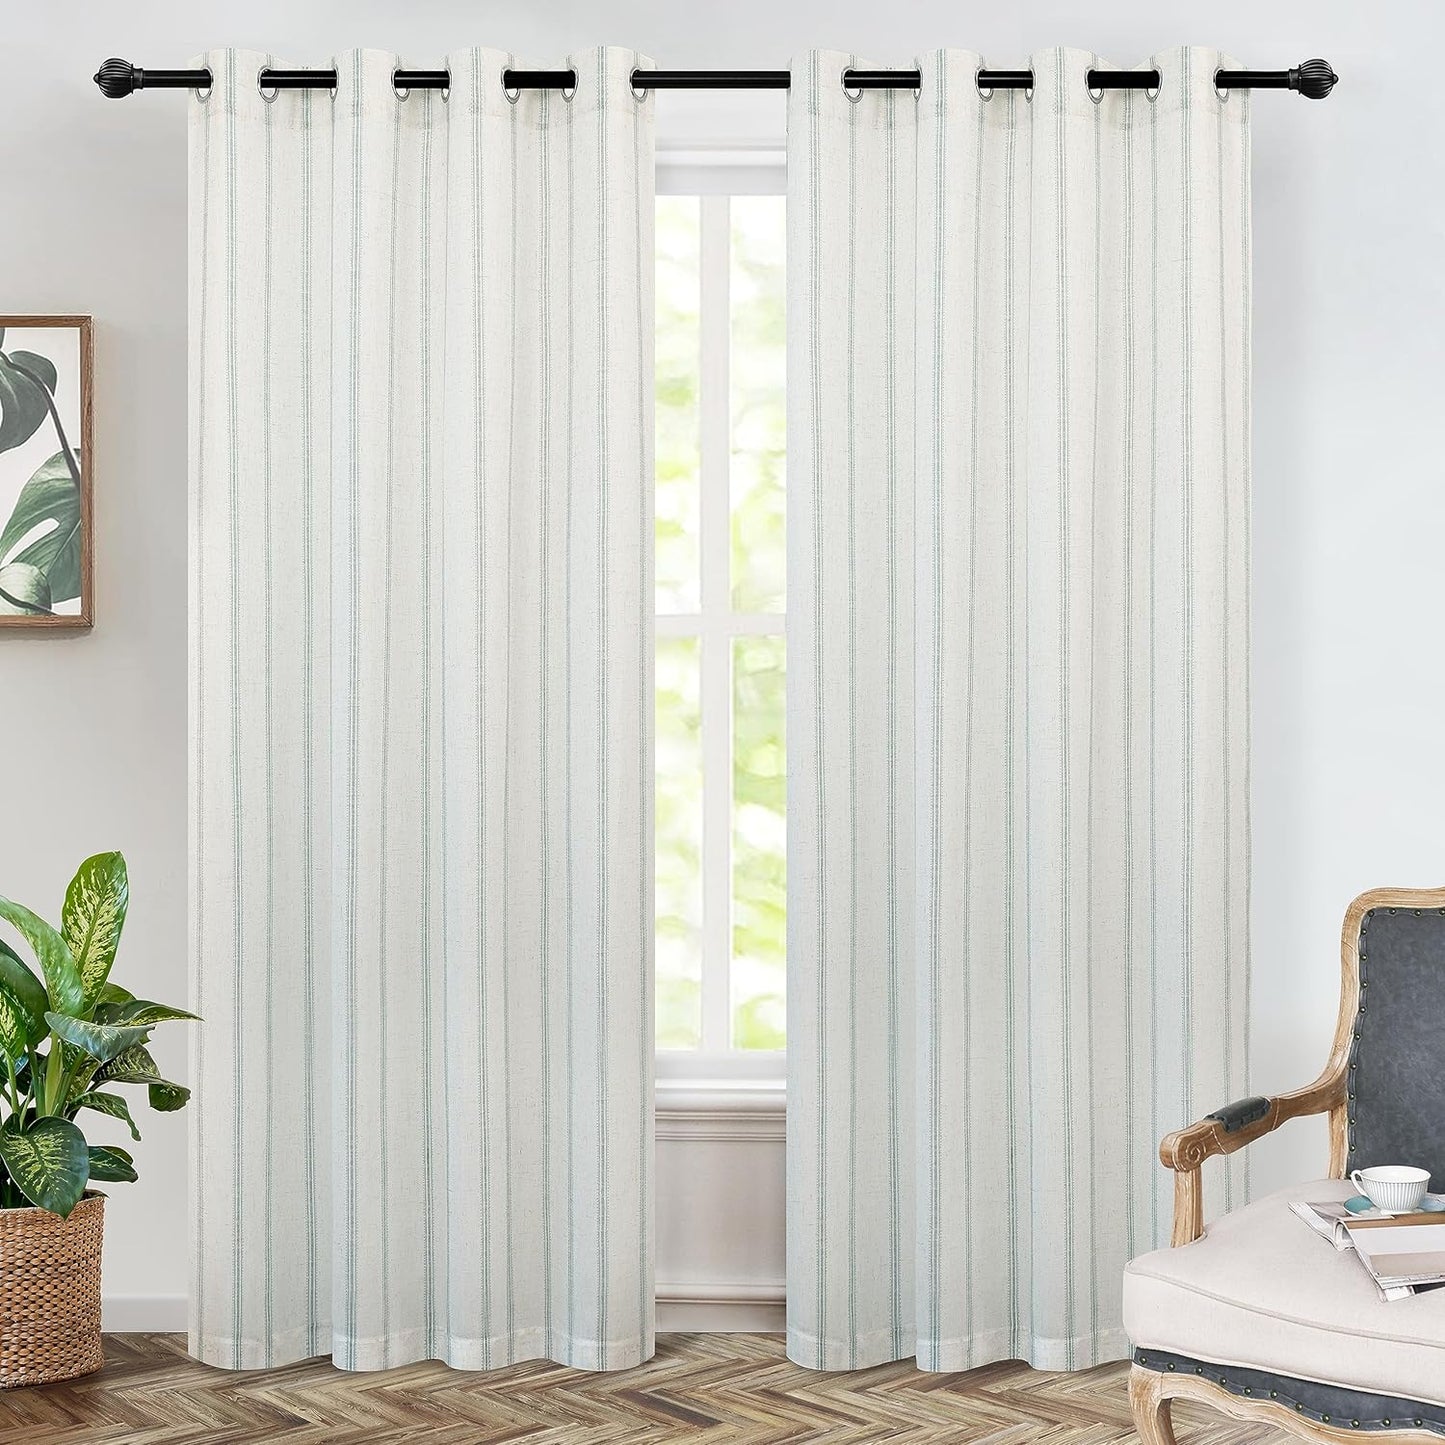 Driftaway Farmhouse Linen Blend Blackout Curtains 84 Inches Long for Bedroom Vertical Striped Printed Linen Curtains Thermal Insulated Grommet Lined Treatments for Living Room 2 Panels W52 X L84 Grey  DriftAway Light Jade Green 52"X84" 